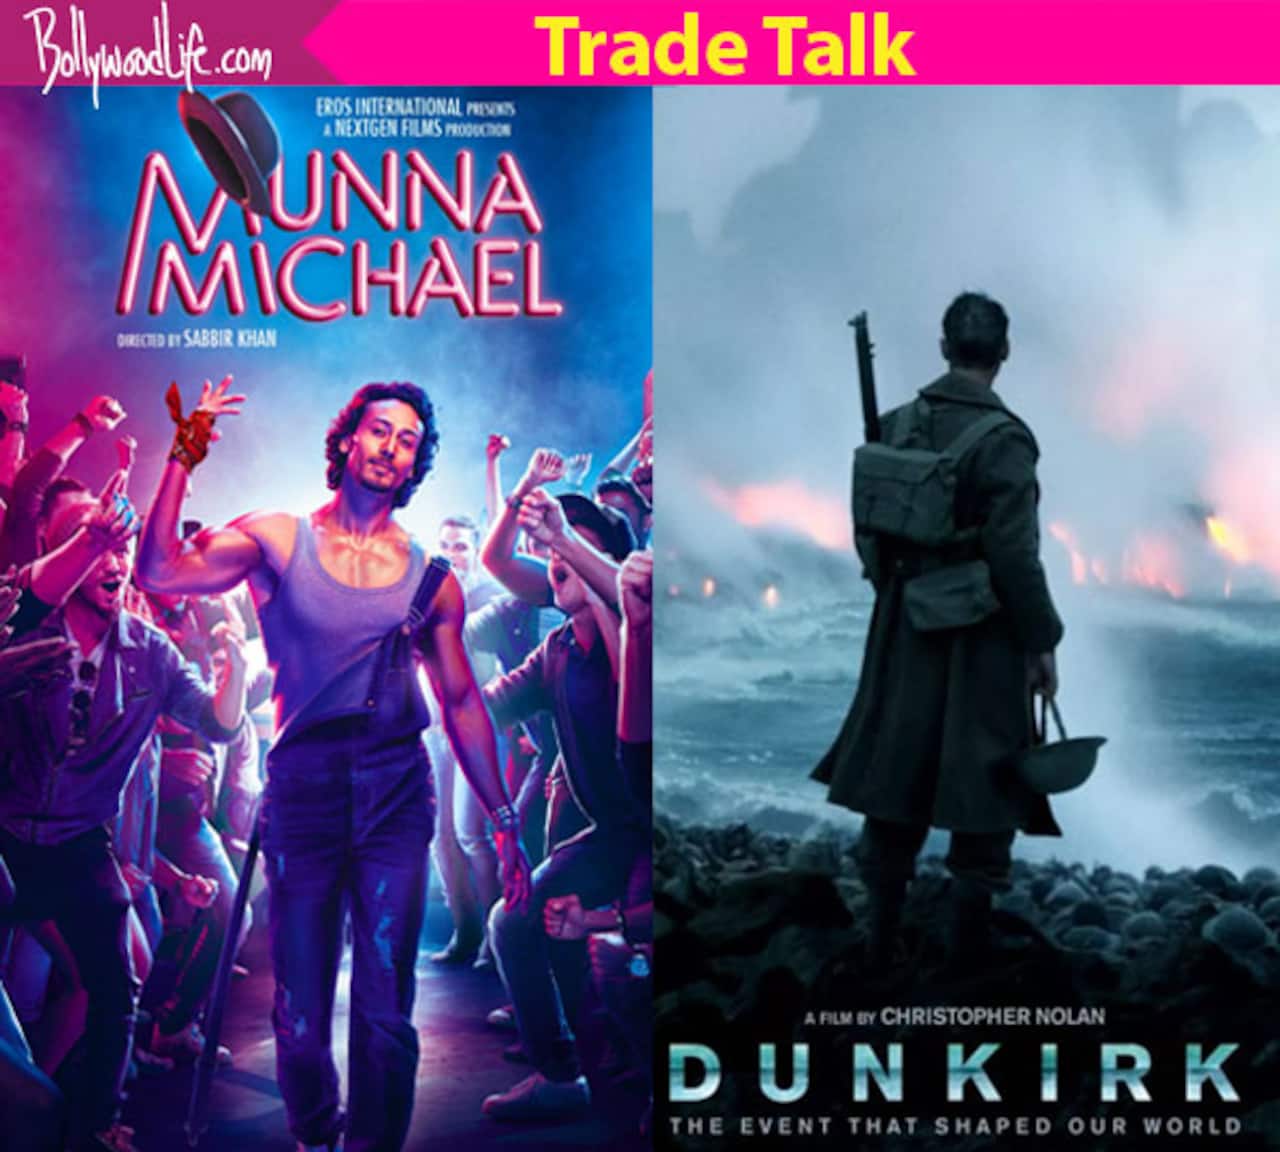 Box Office Report: Tiger Shroff's Munna Michael will own the single  screens, while Dunkirk will rule the multiplexes - Bollywood News & Gossip,  Movie Reviews, Trailers & Videos at 